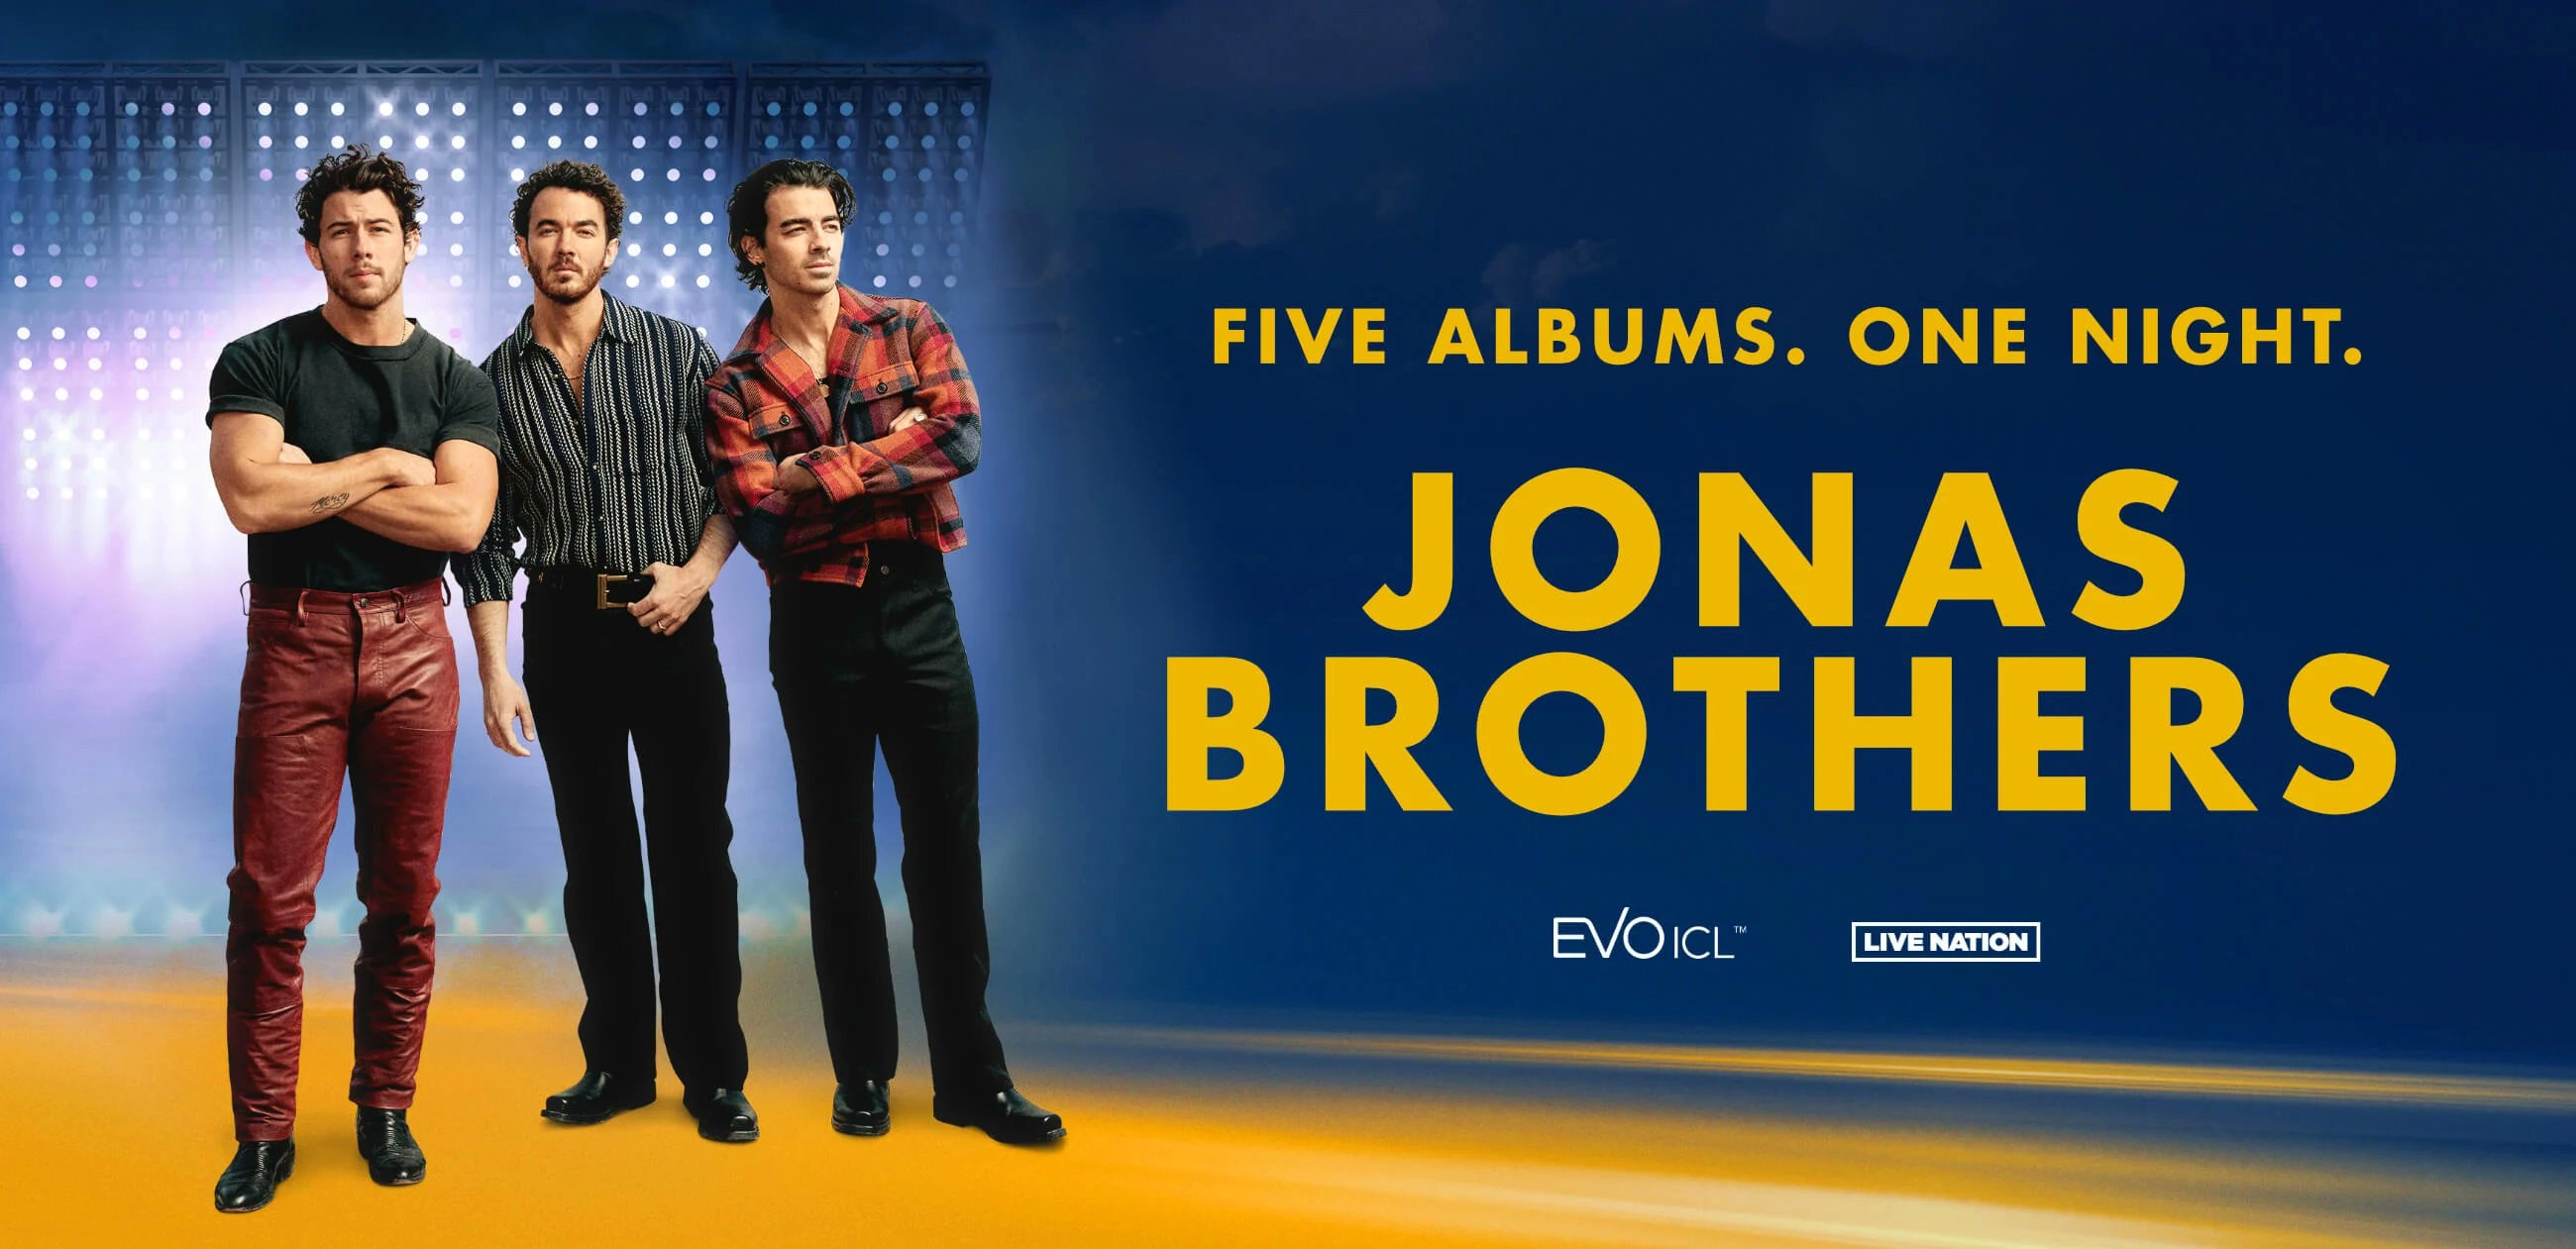 Jonas Brothers at LDLC Arena Tickets